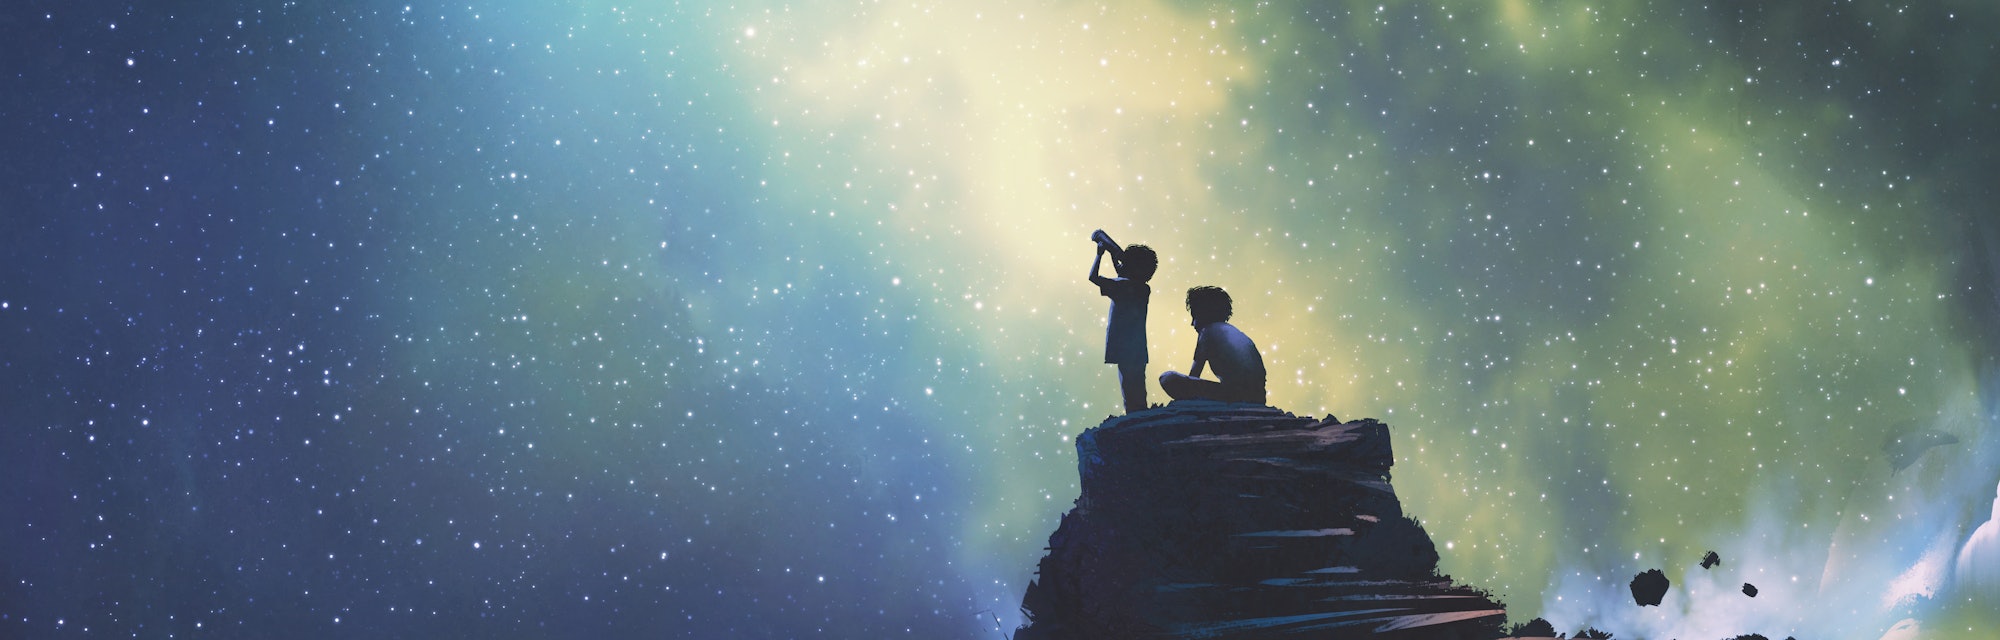 night scene of two brothers outdoors, llittle boy looking through a telescope at stars in the sky, d...